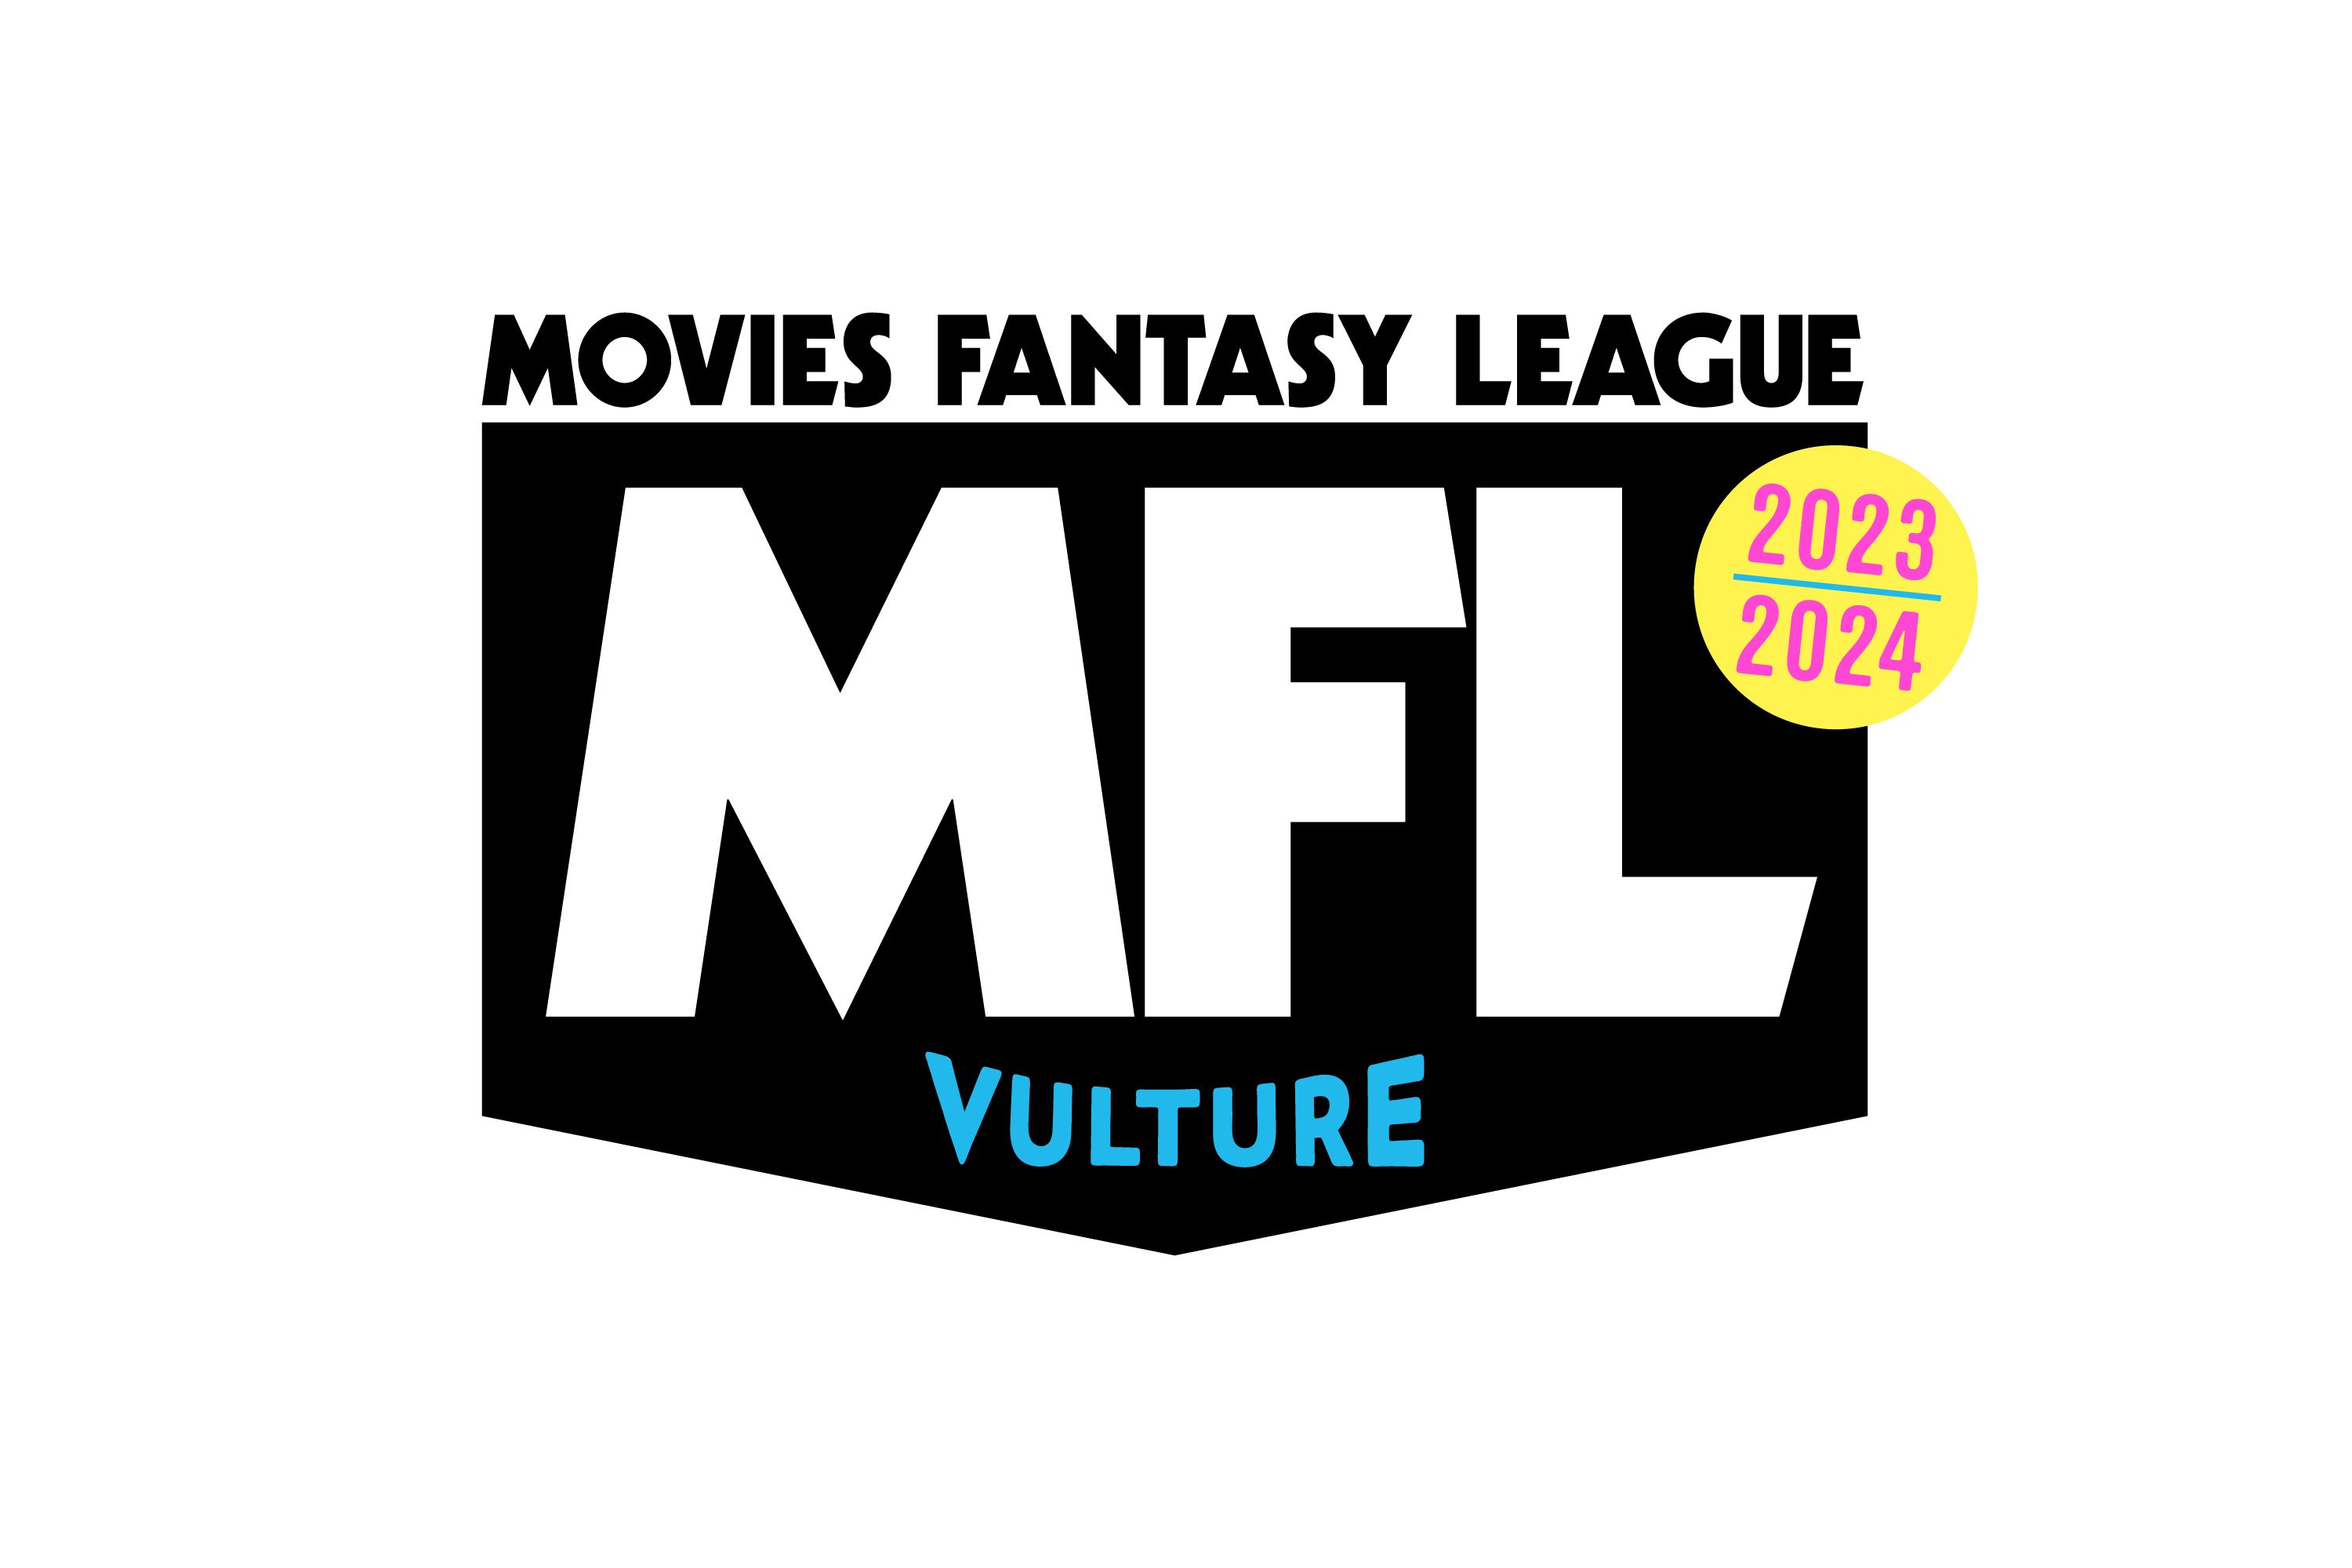 Draft Your Team for Vultures Movies Fantasy League